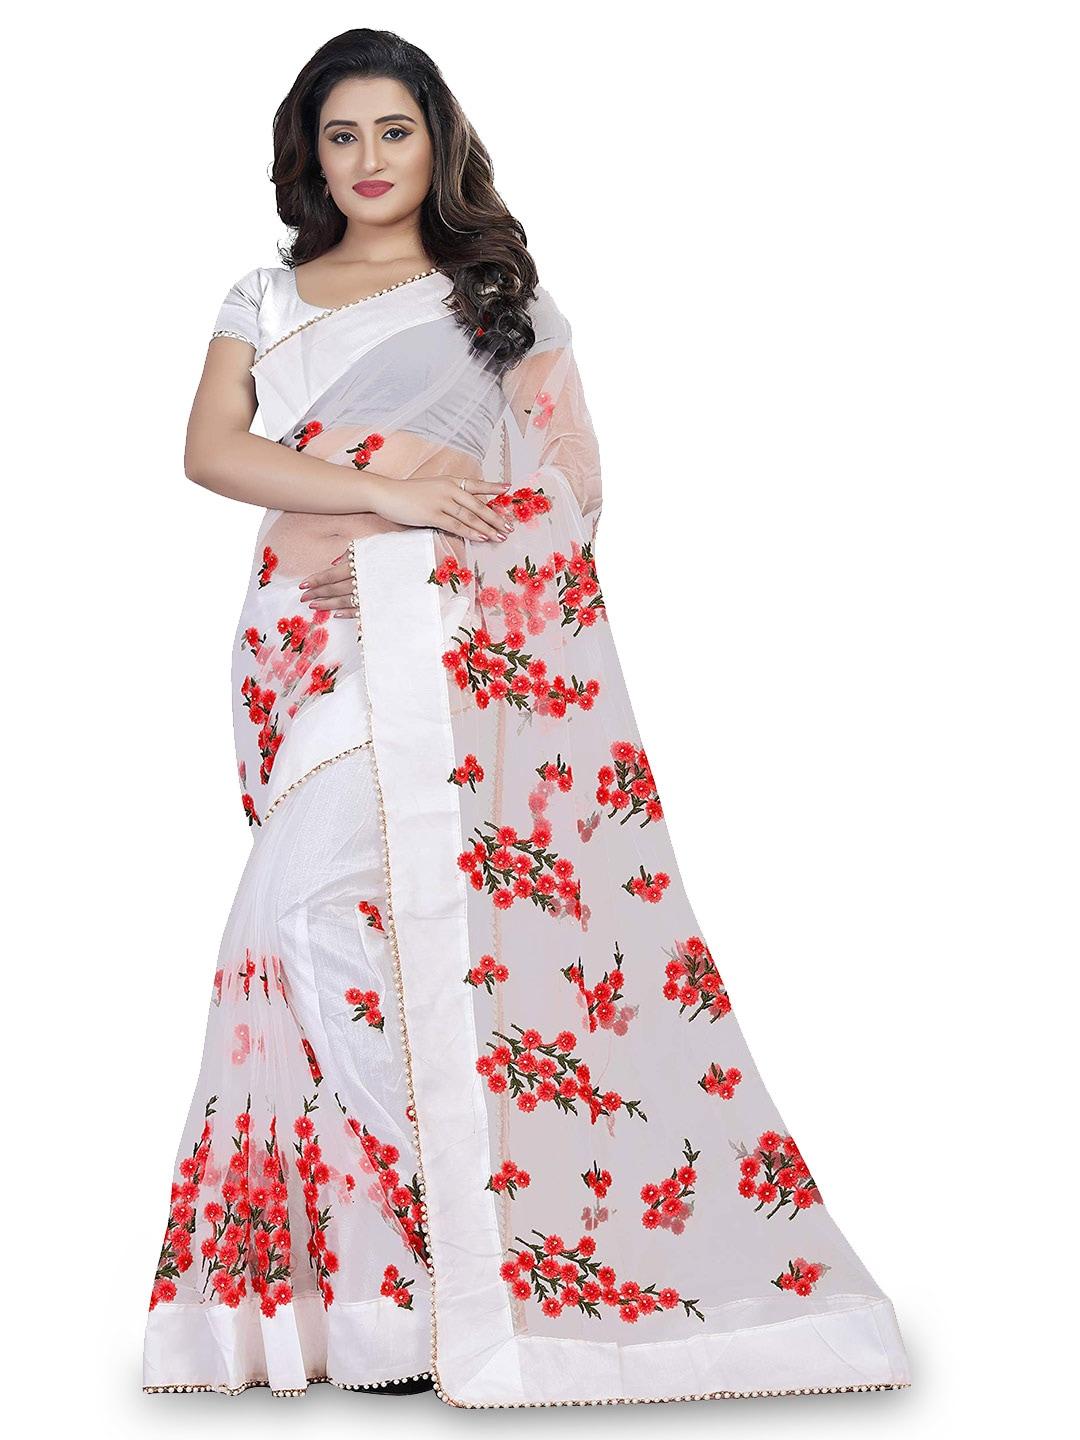 nityanta fab white & red floral beads and stones net ikat saree